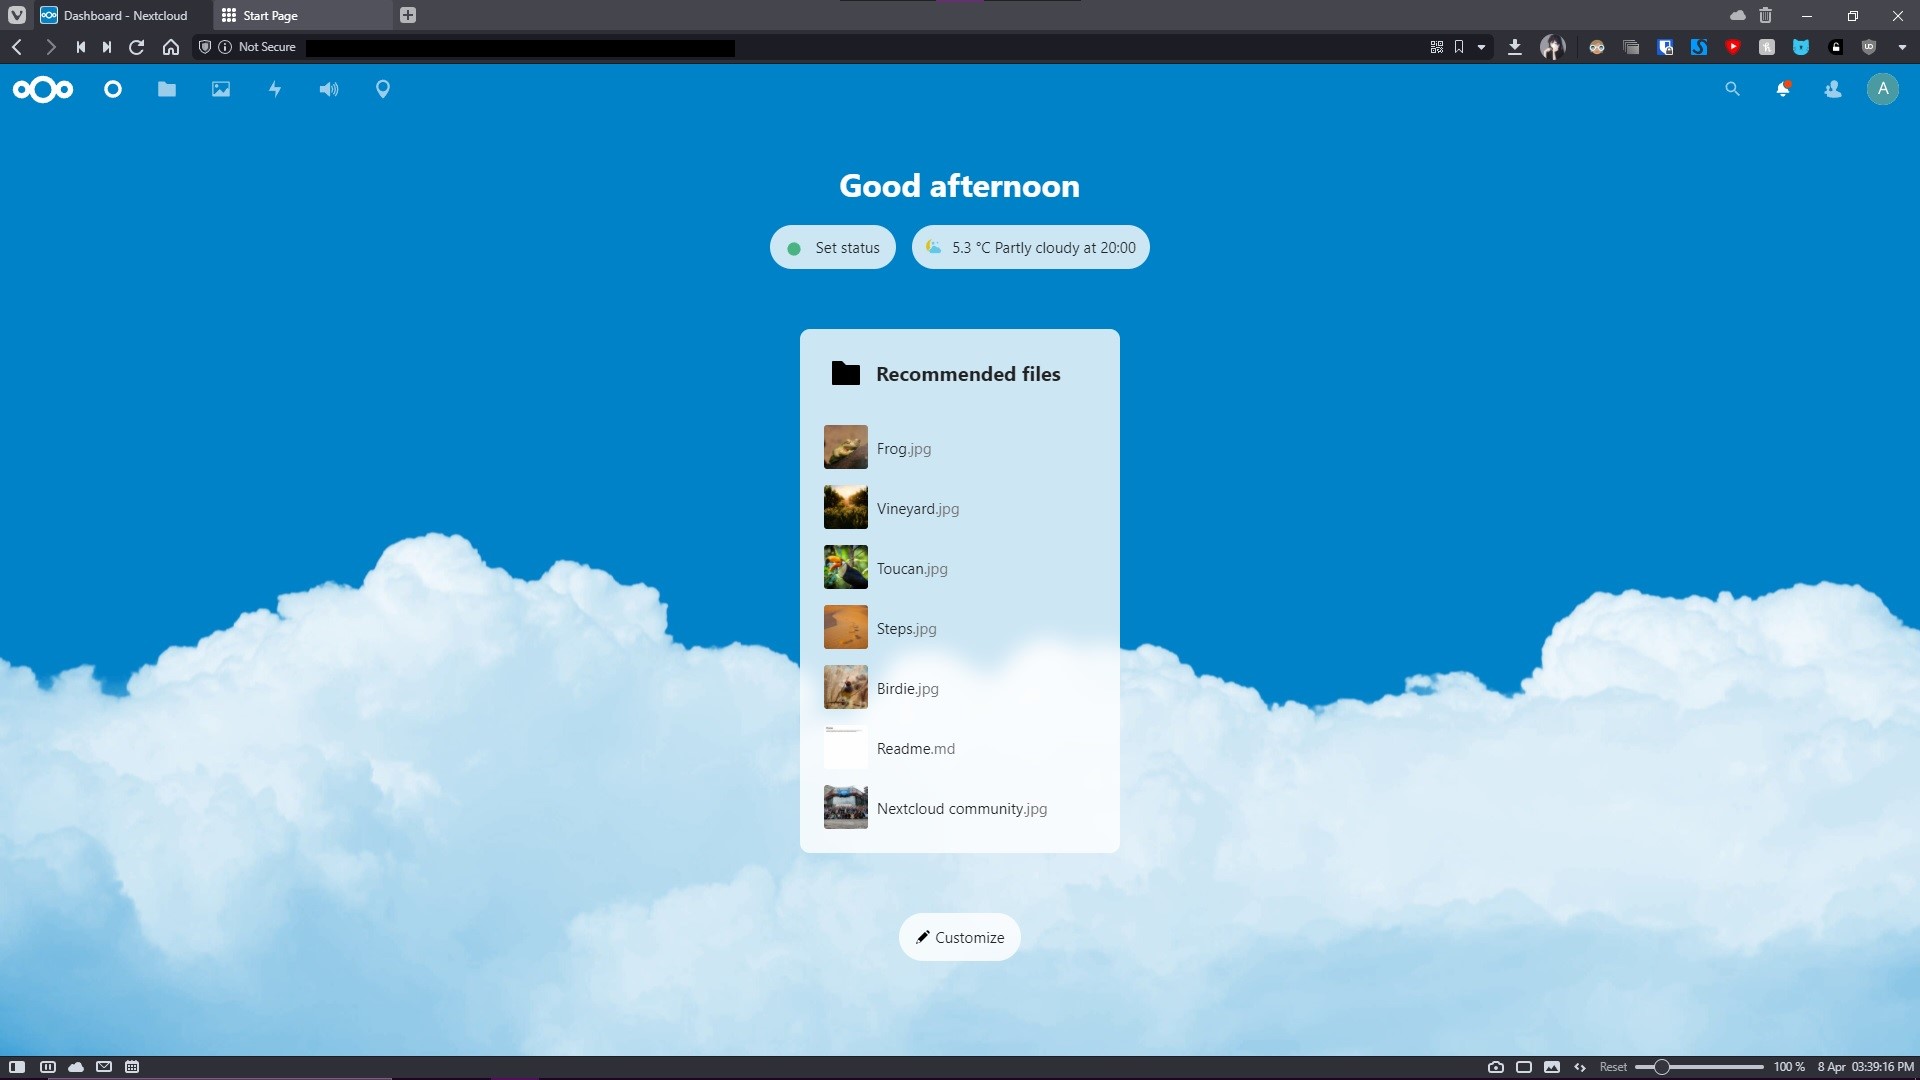 The Nextcloud dashboard in a Vivaldi browser window. The top text says 'good afternoon' and below is a list of files